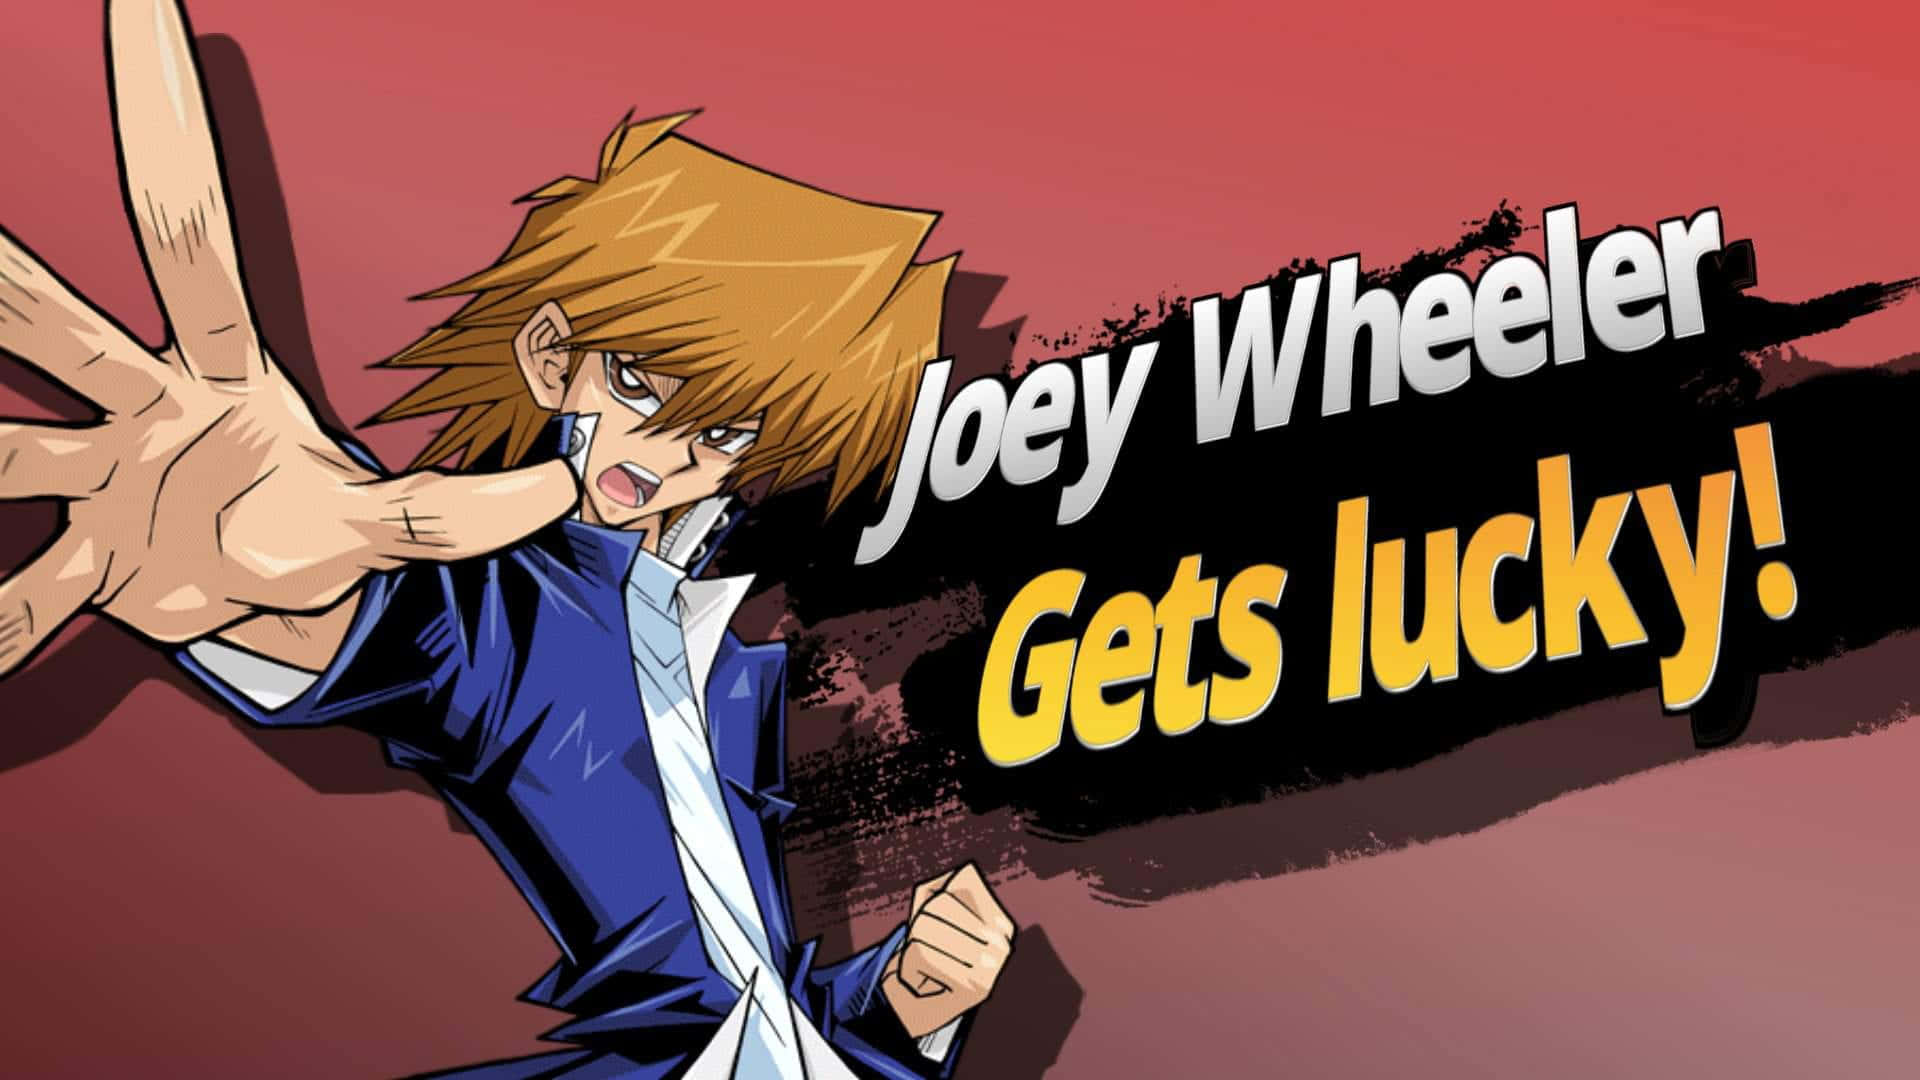 Joey Wheeler from Yu-Gi-Oh! in action Wallpaper